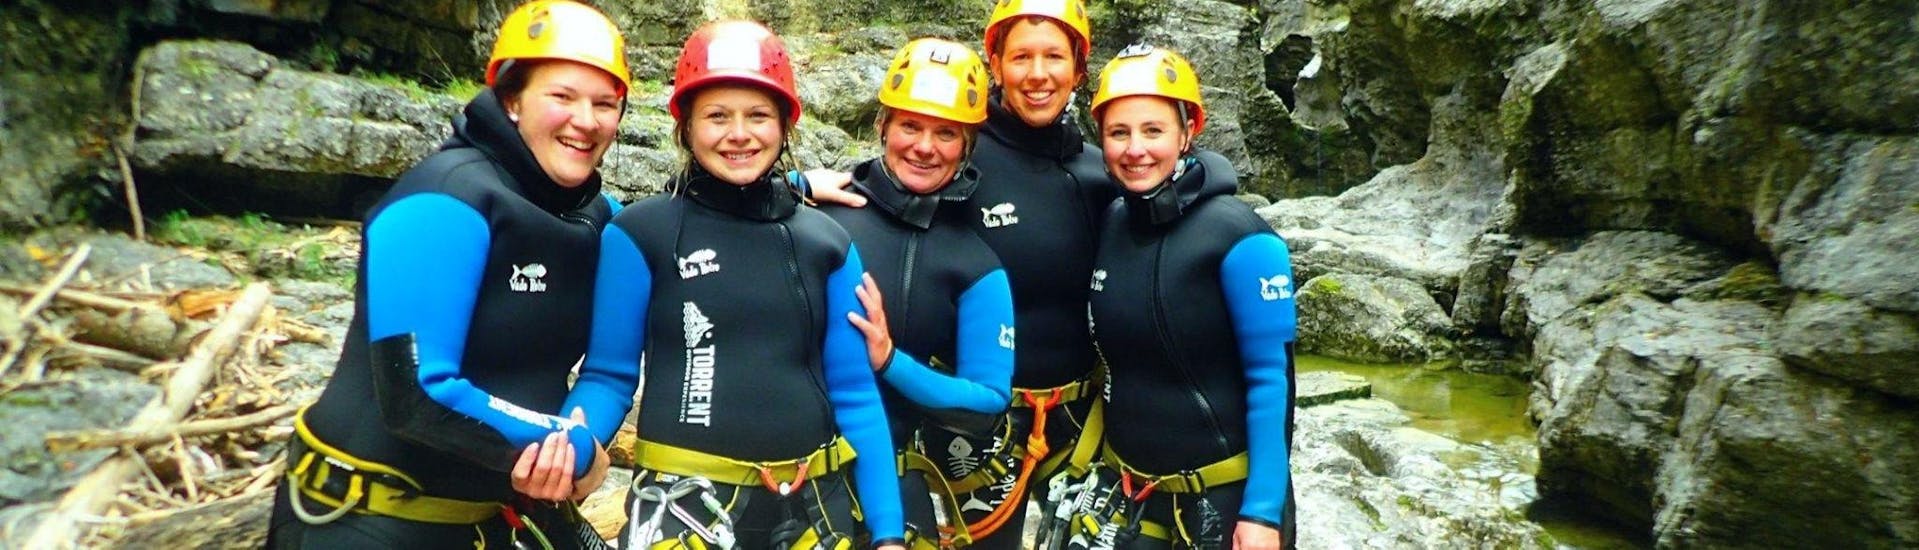 A group of friends is posing for a photo in the canyon during their Fun Canyoning in the Almbachklamm with Torrent Outdoor Experience.